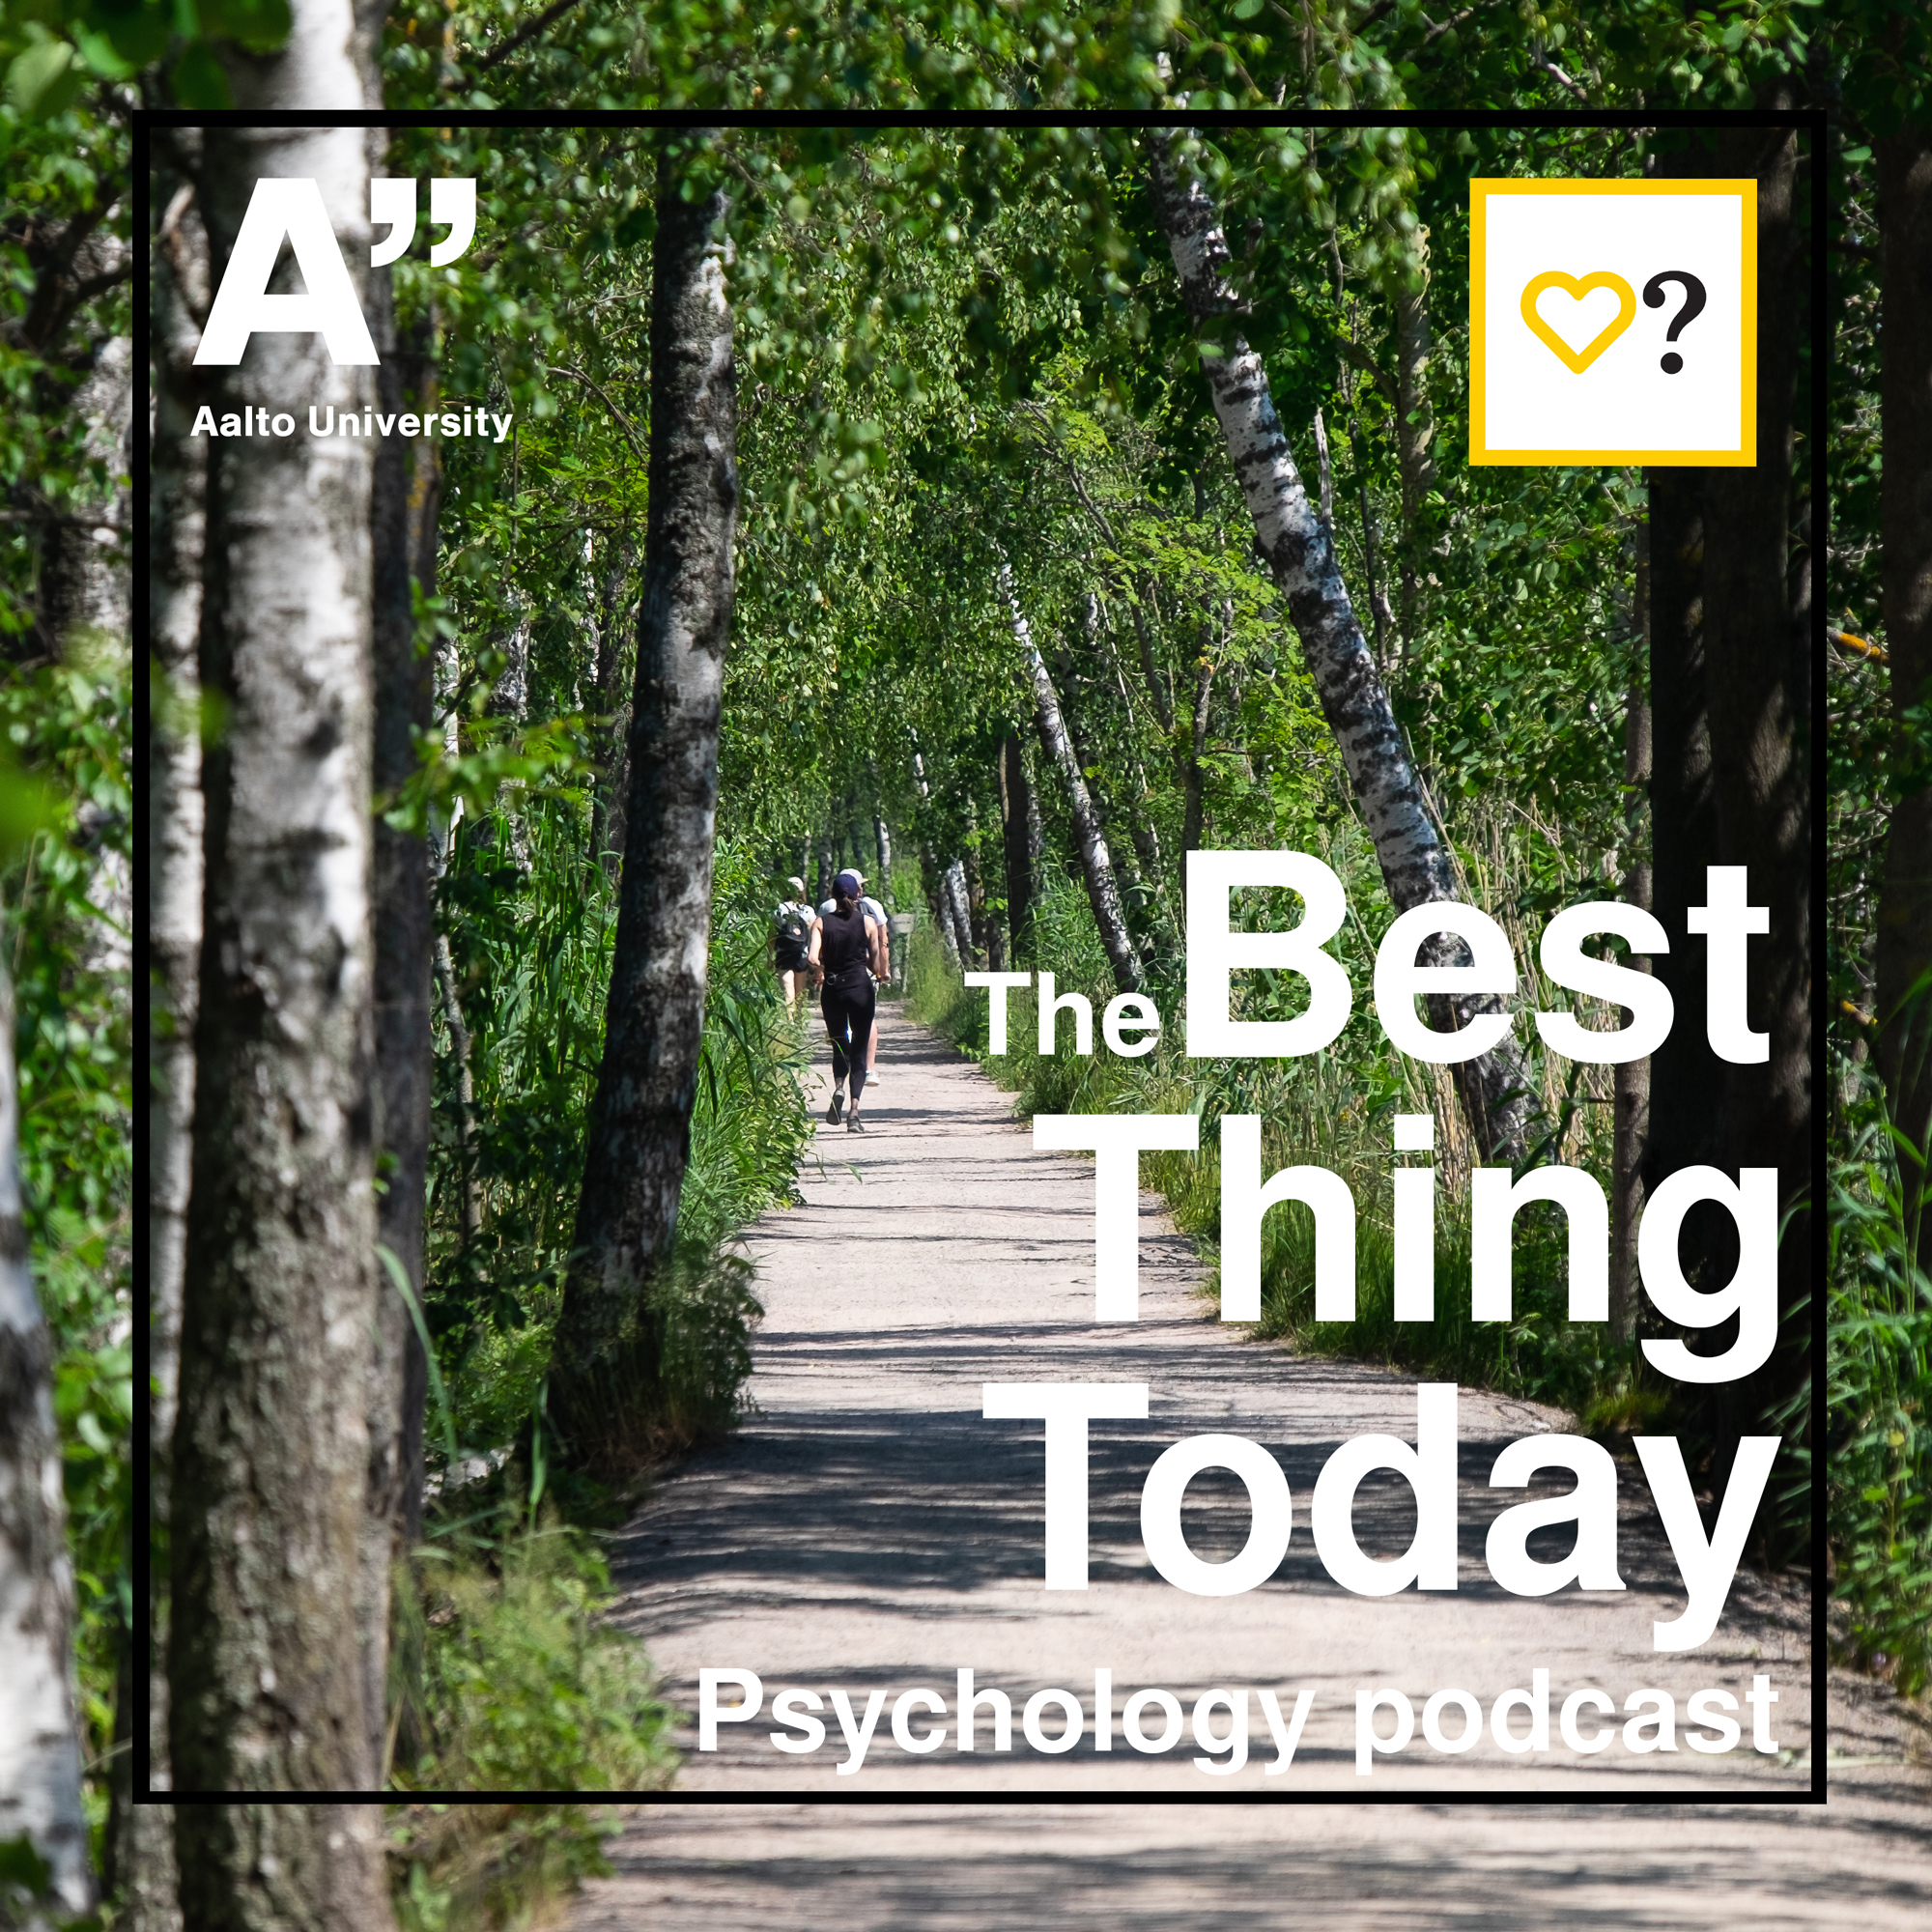 The Best Thing Today podcast from Aalto University 2021. Image by Anni Kääriä.